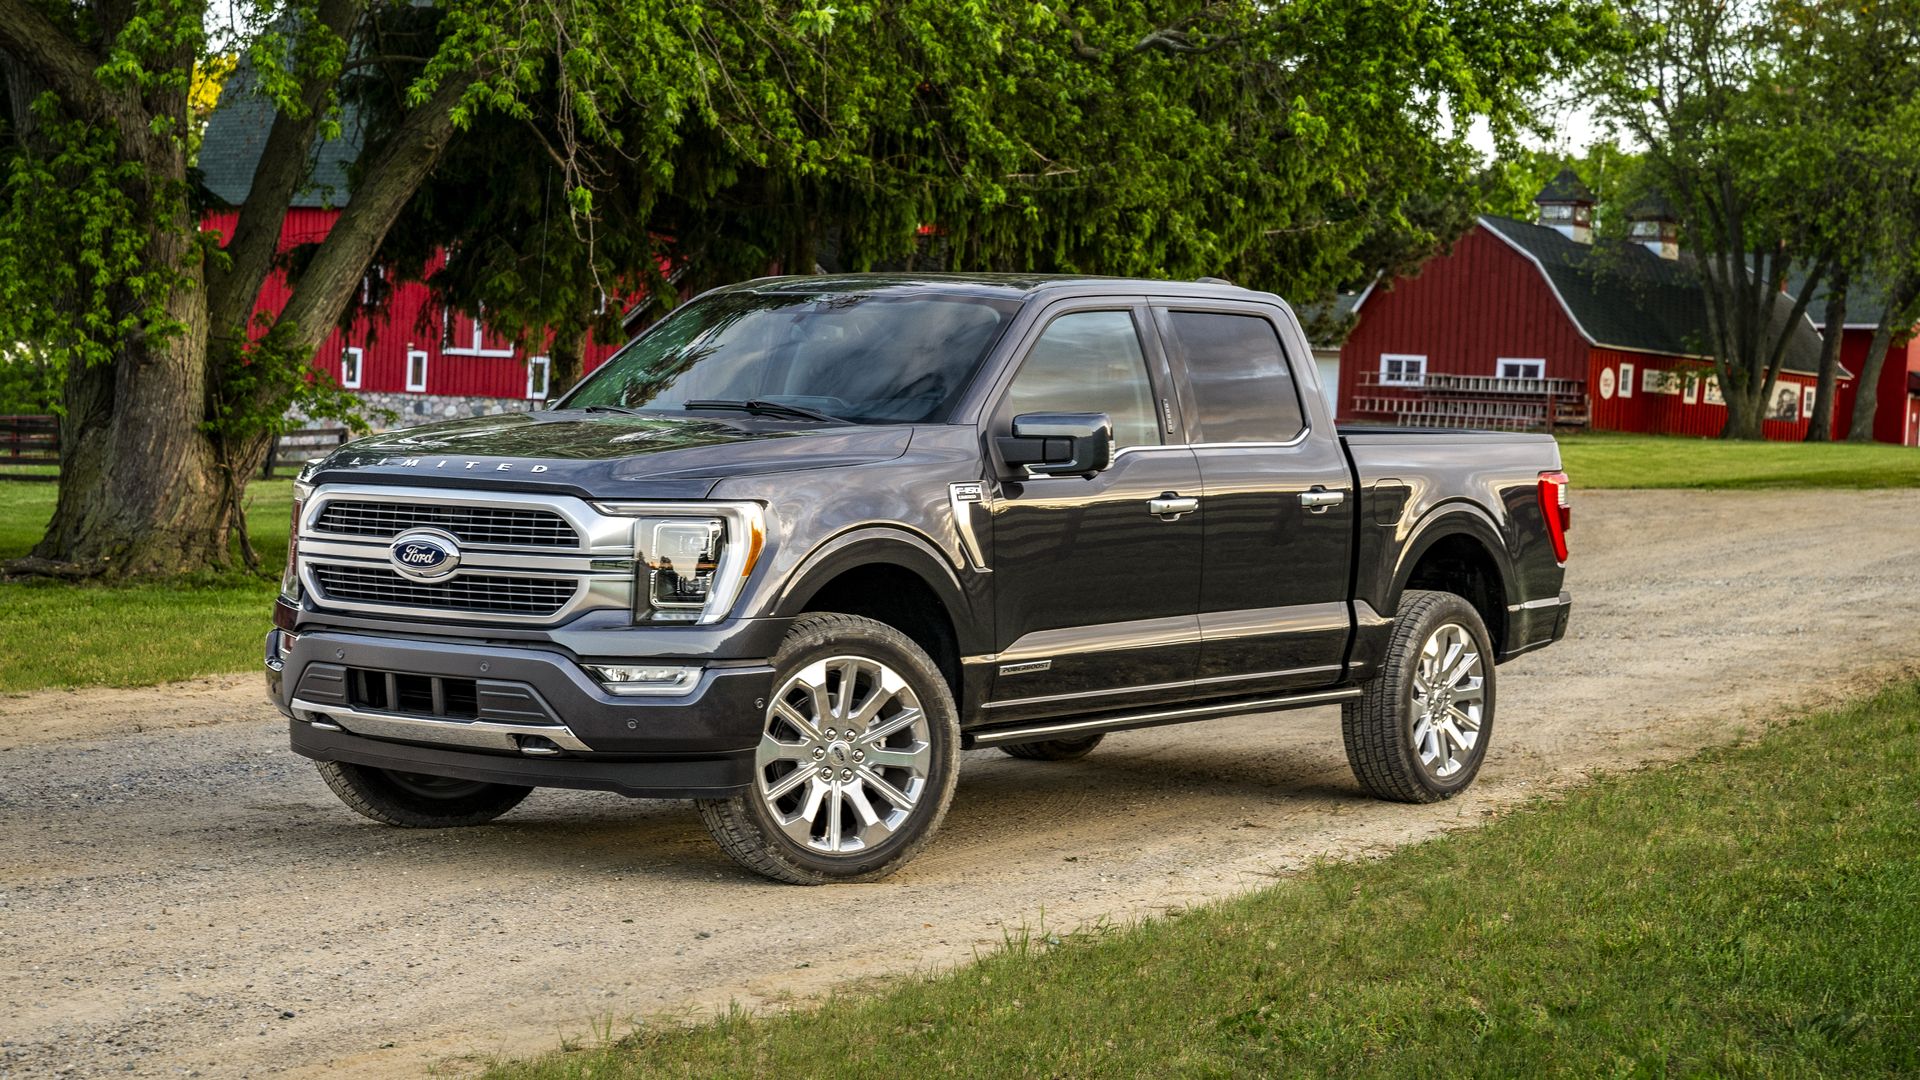 Image of Ford's 2021 F-150 pickup truck in front of a red barn